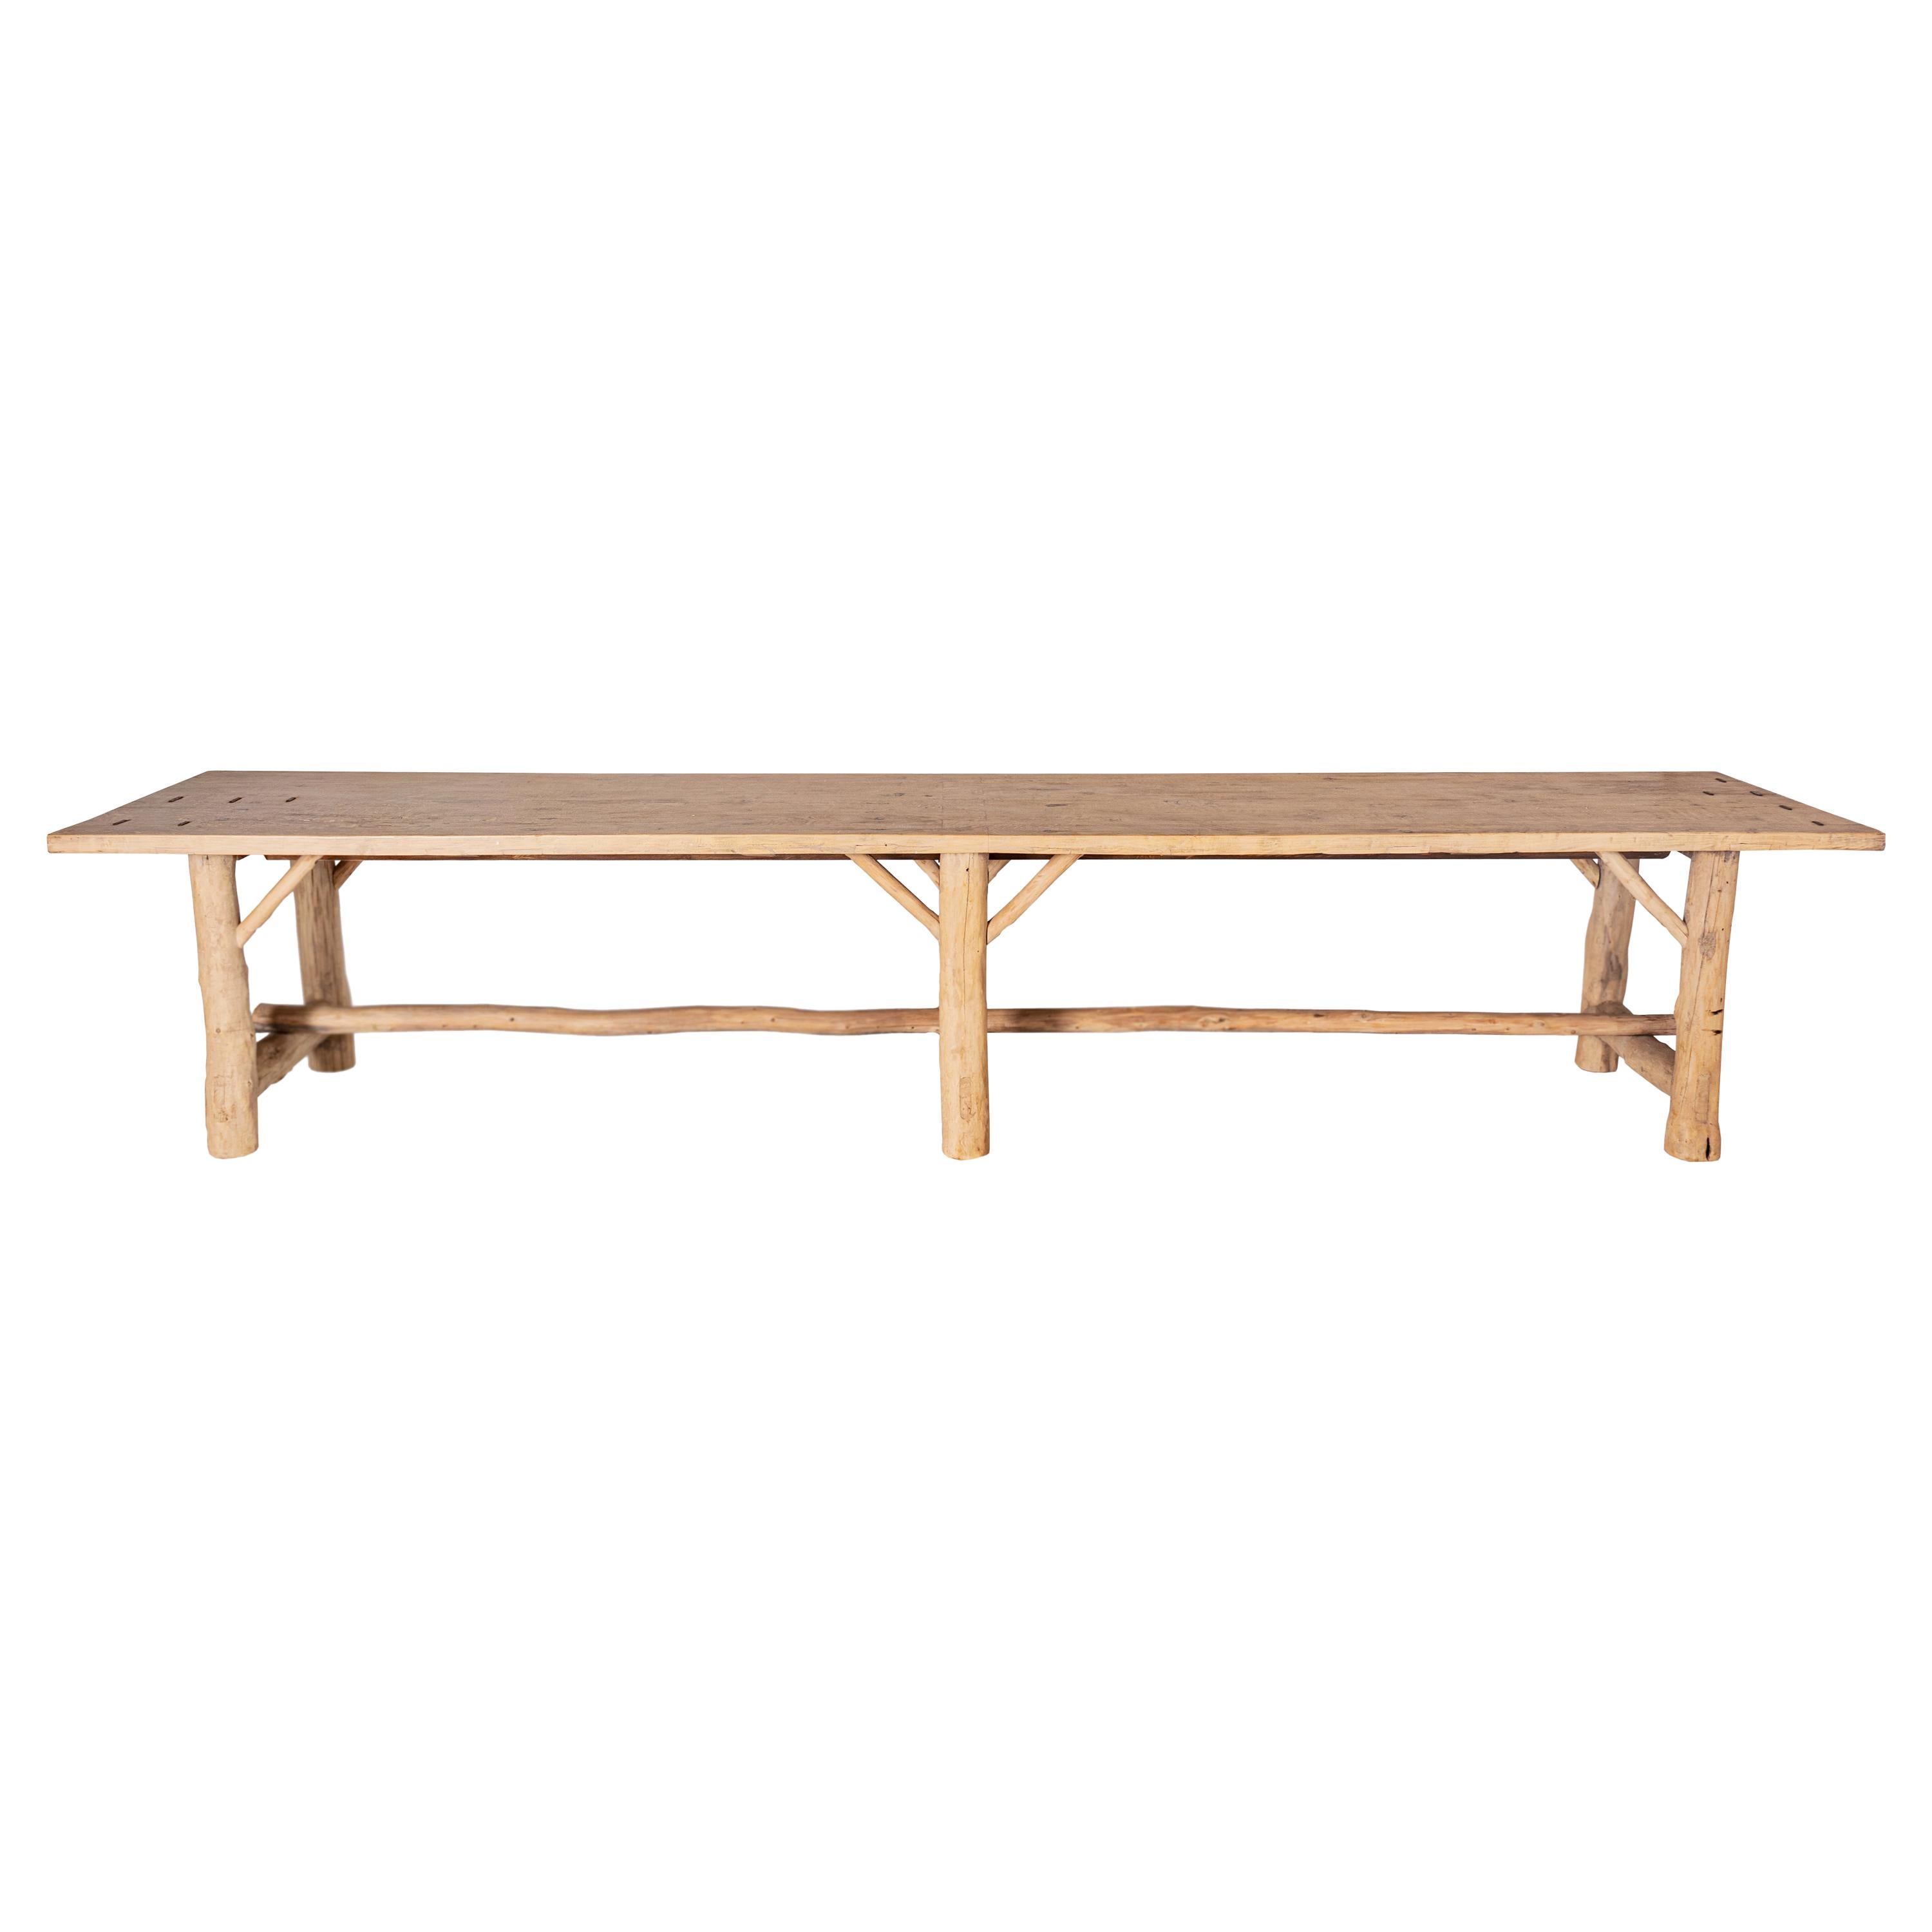 Limb and Trunk Motif Dining Table